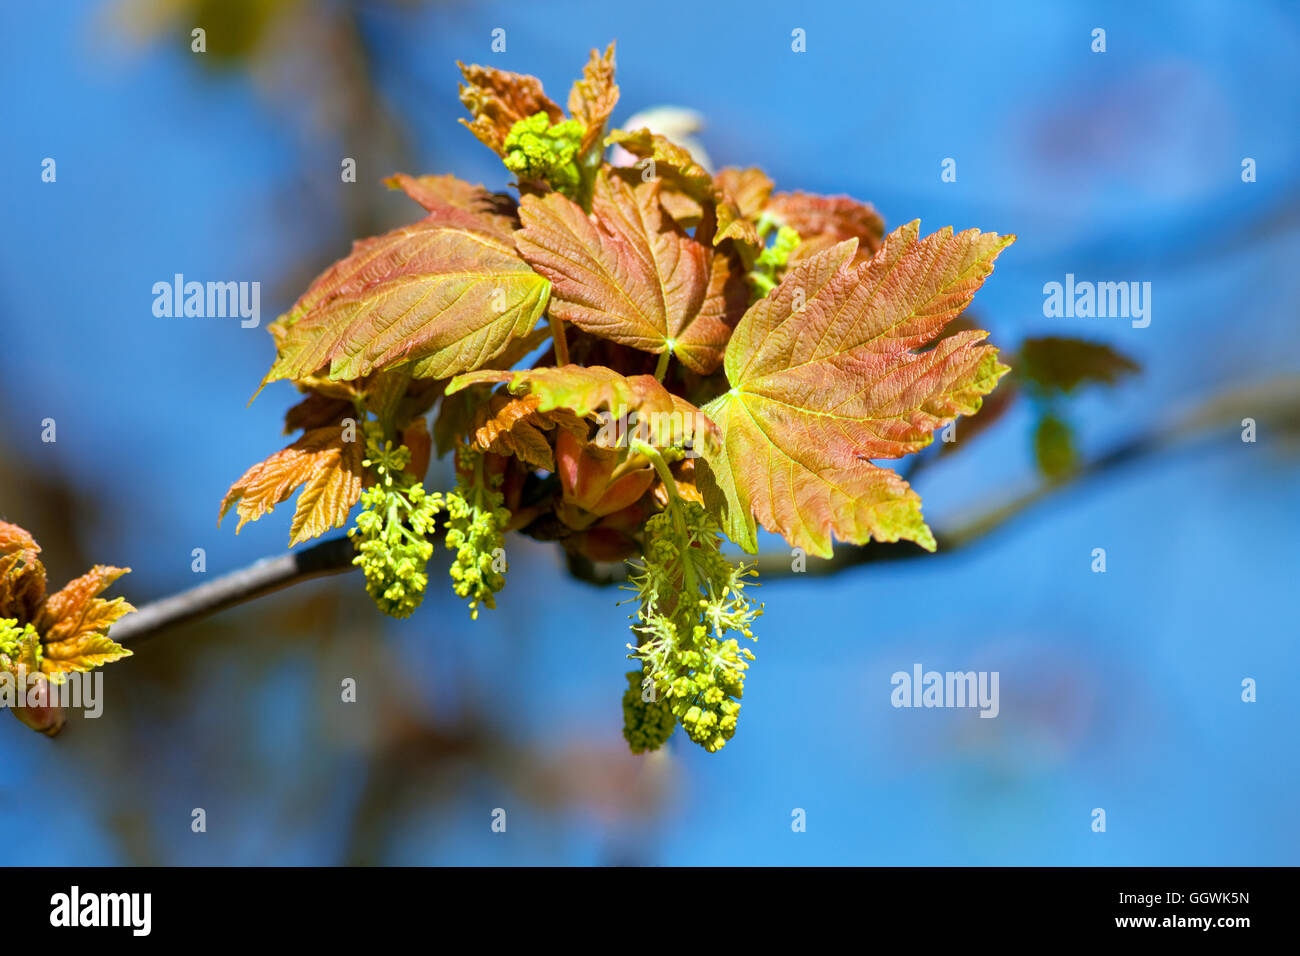 Closeup of Maple Flower at Blossom in Spring Stock Photo